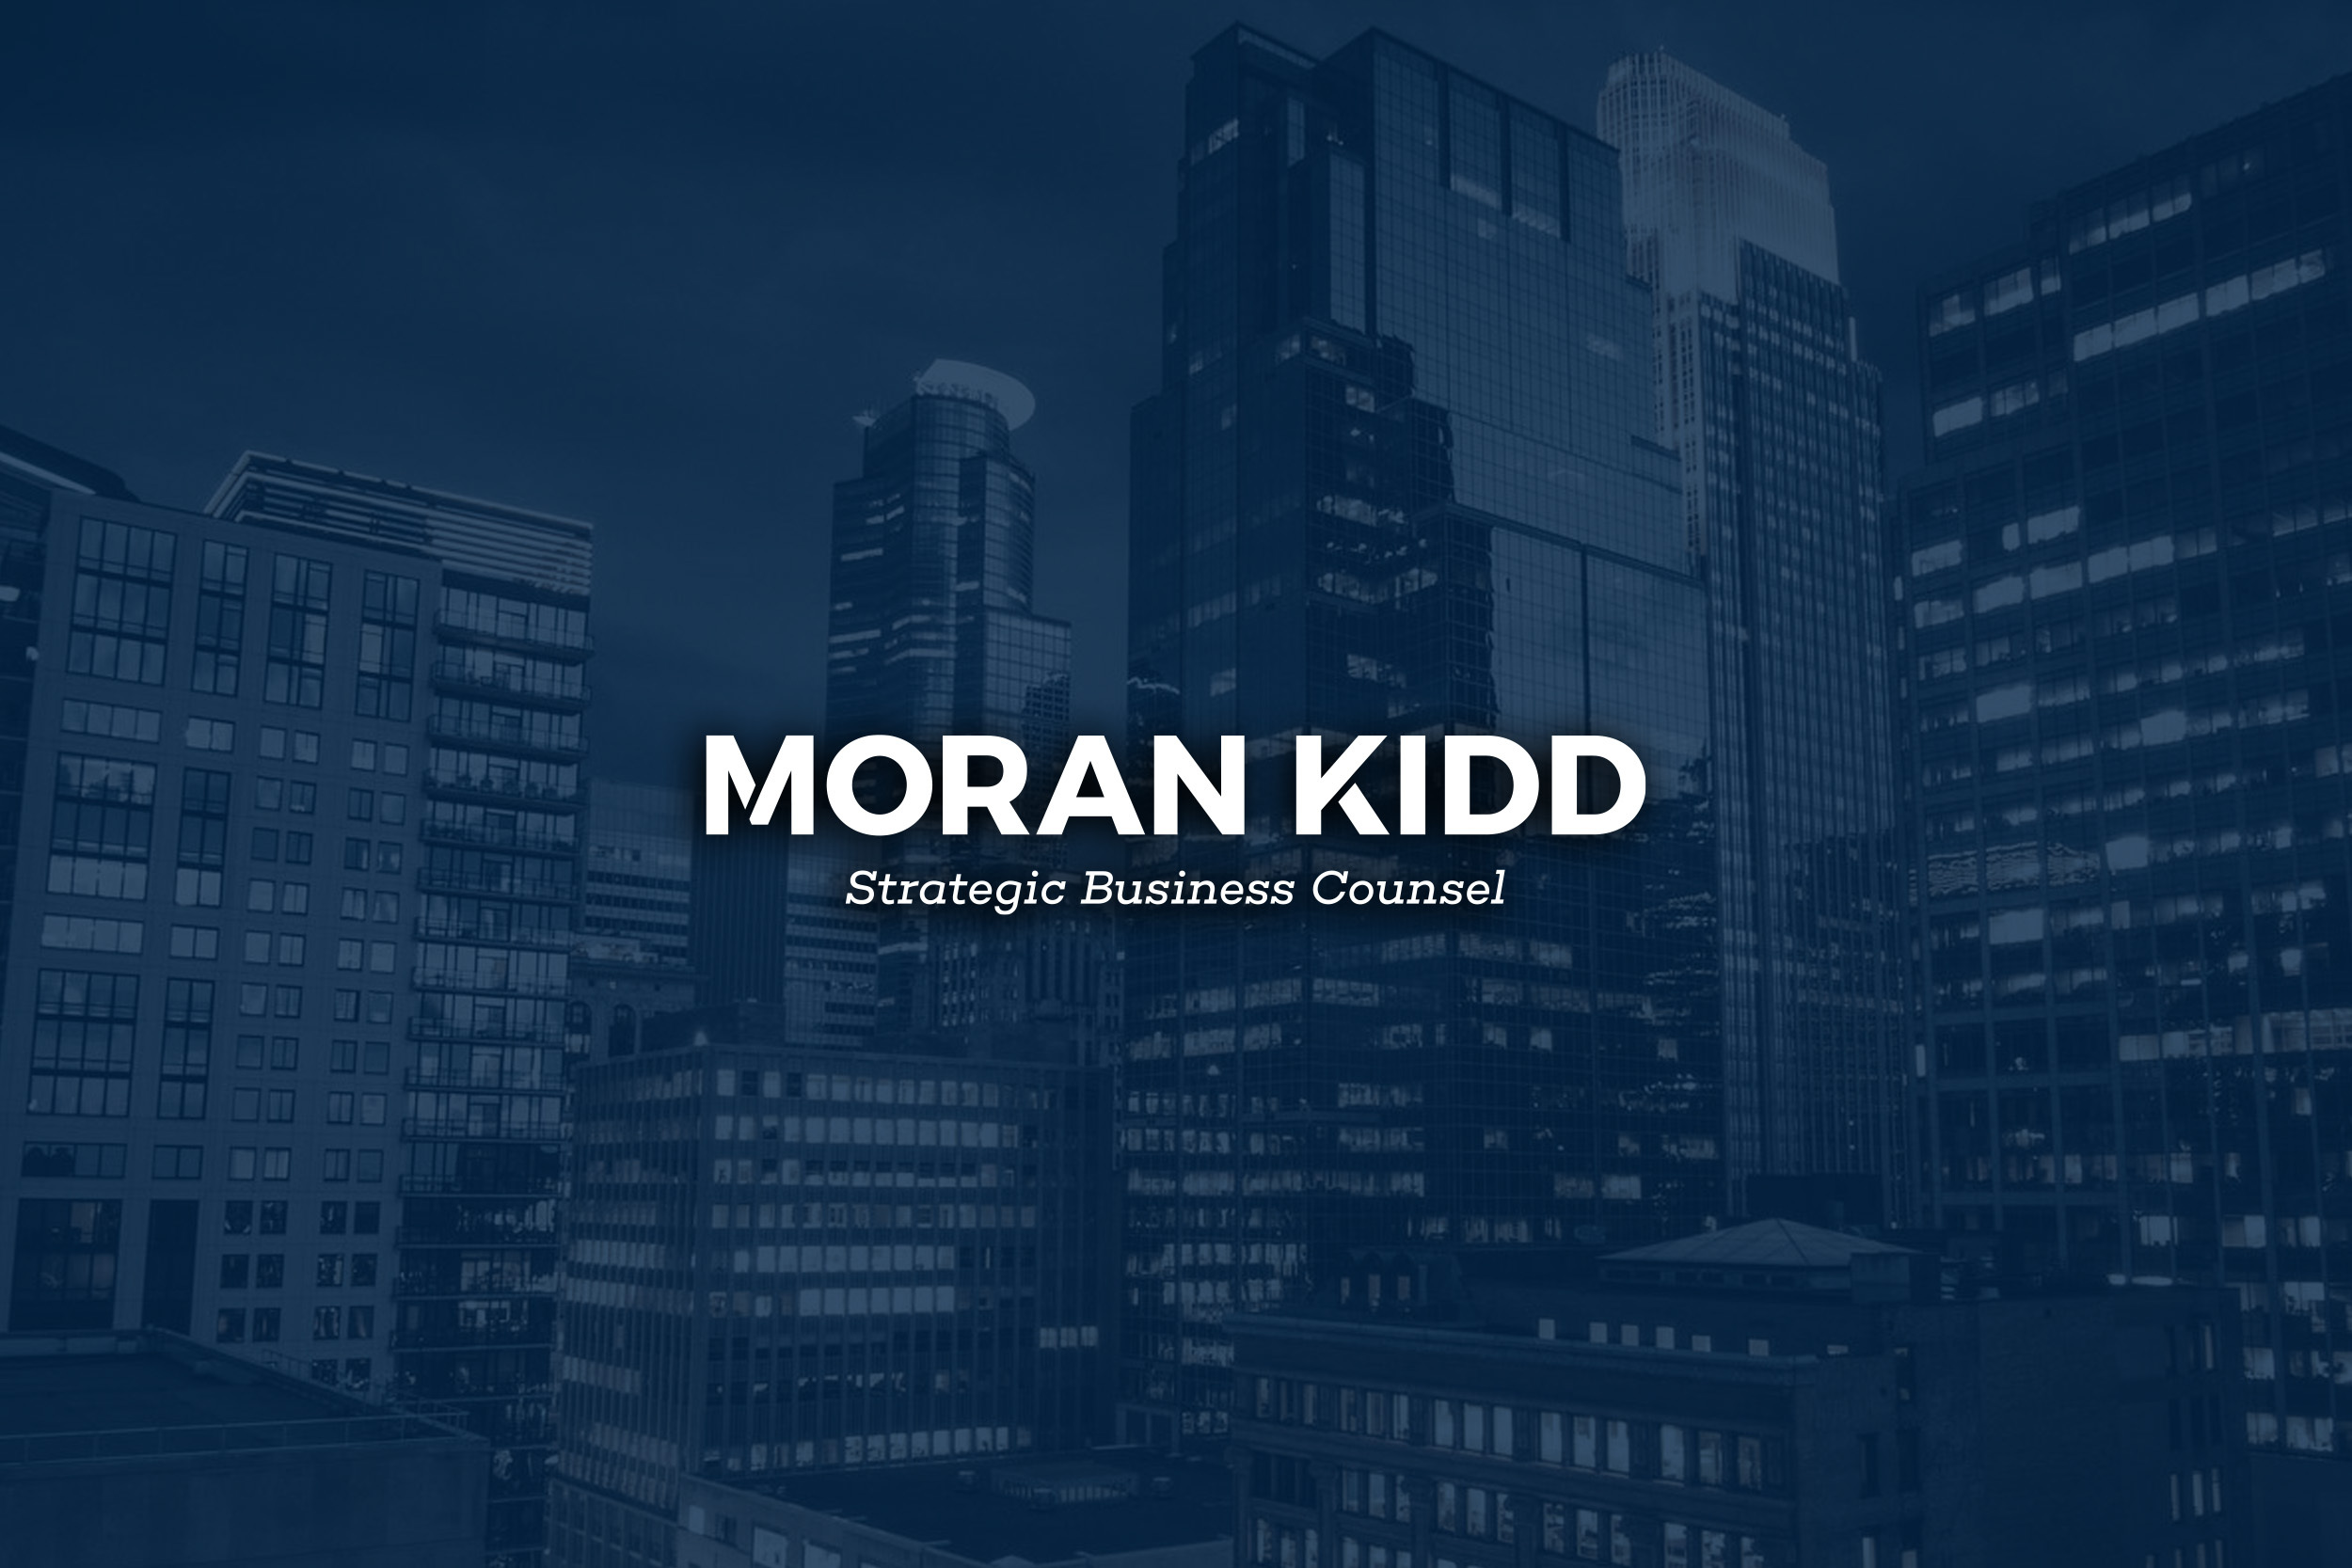 MoranKidd logo on top of city scape.